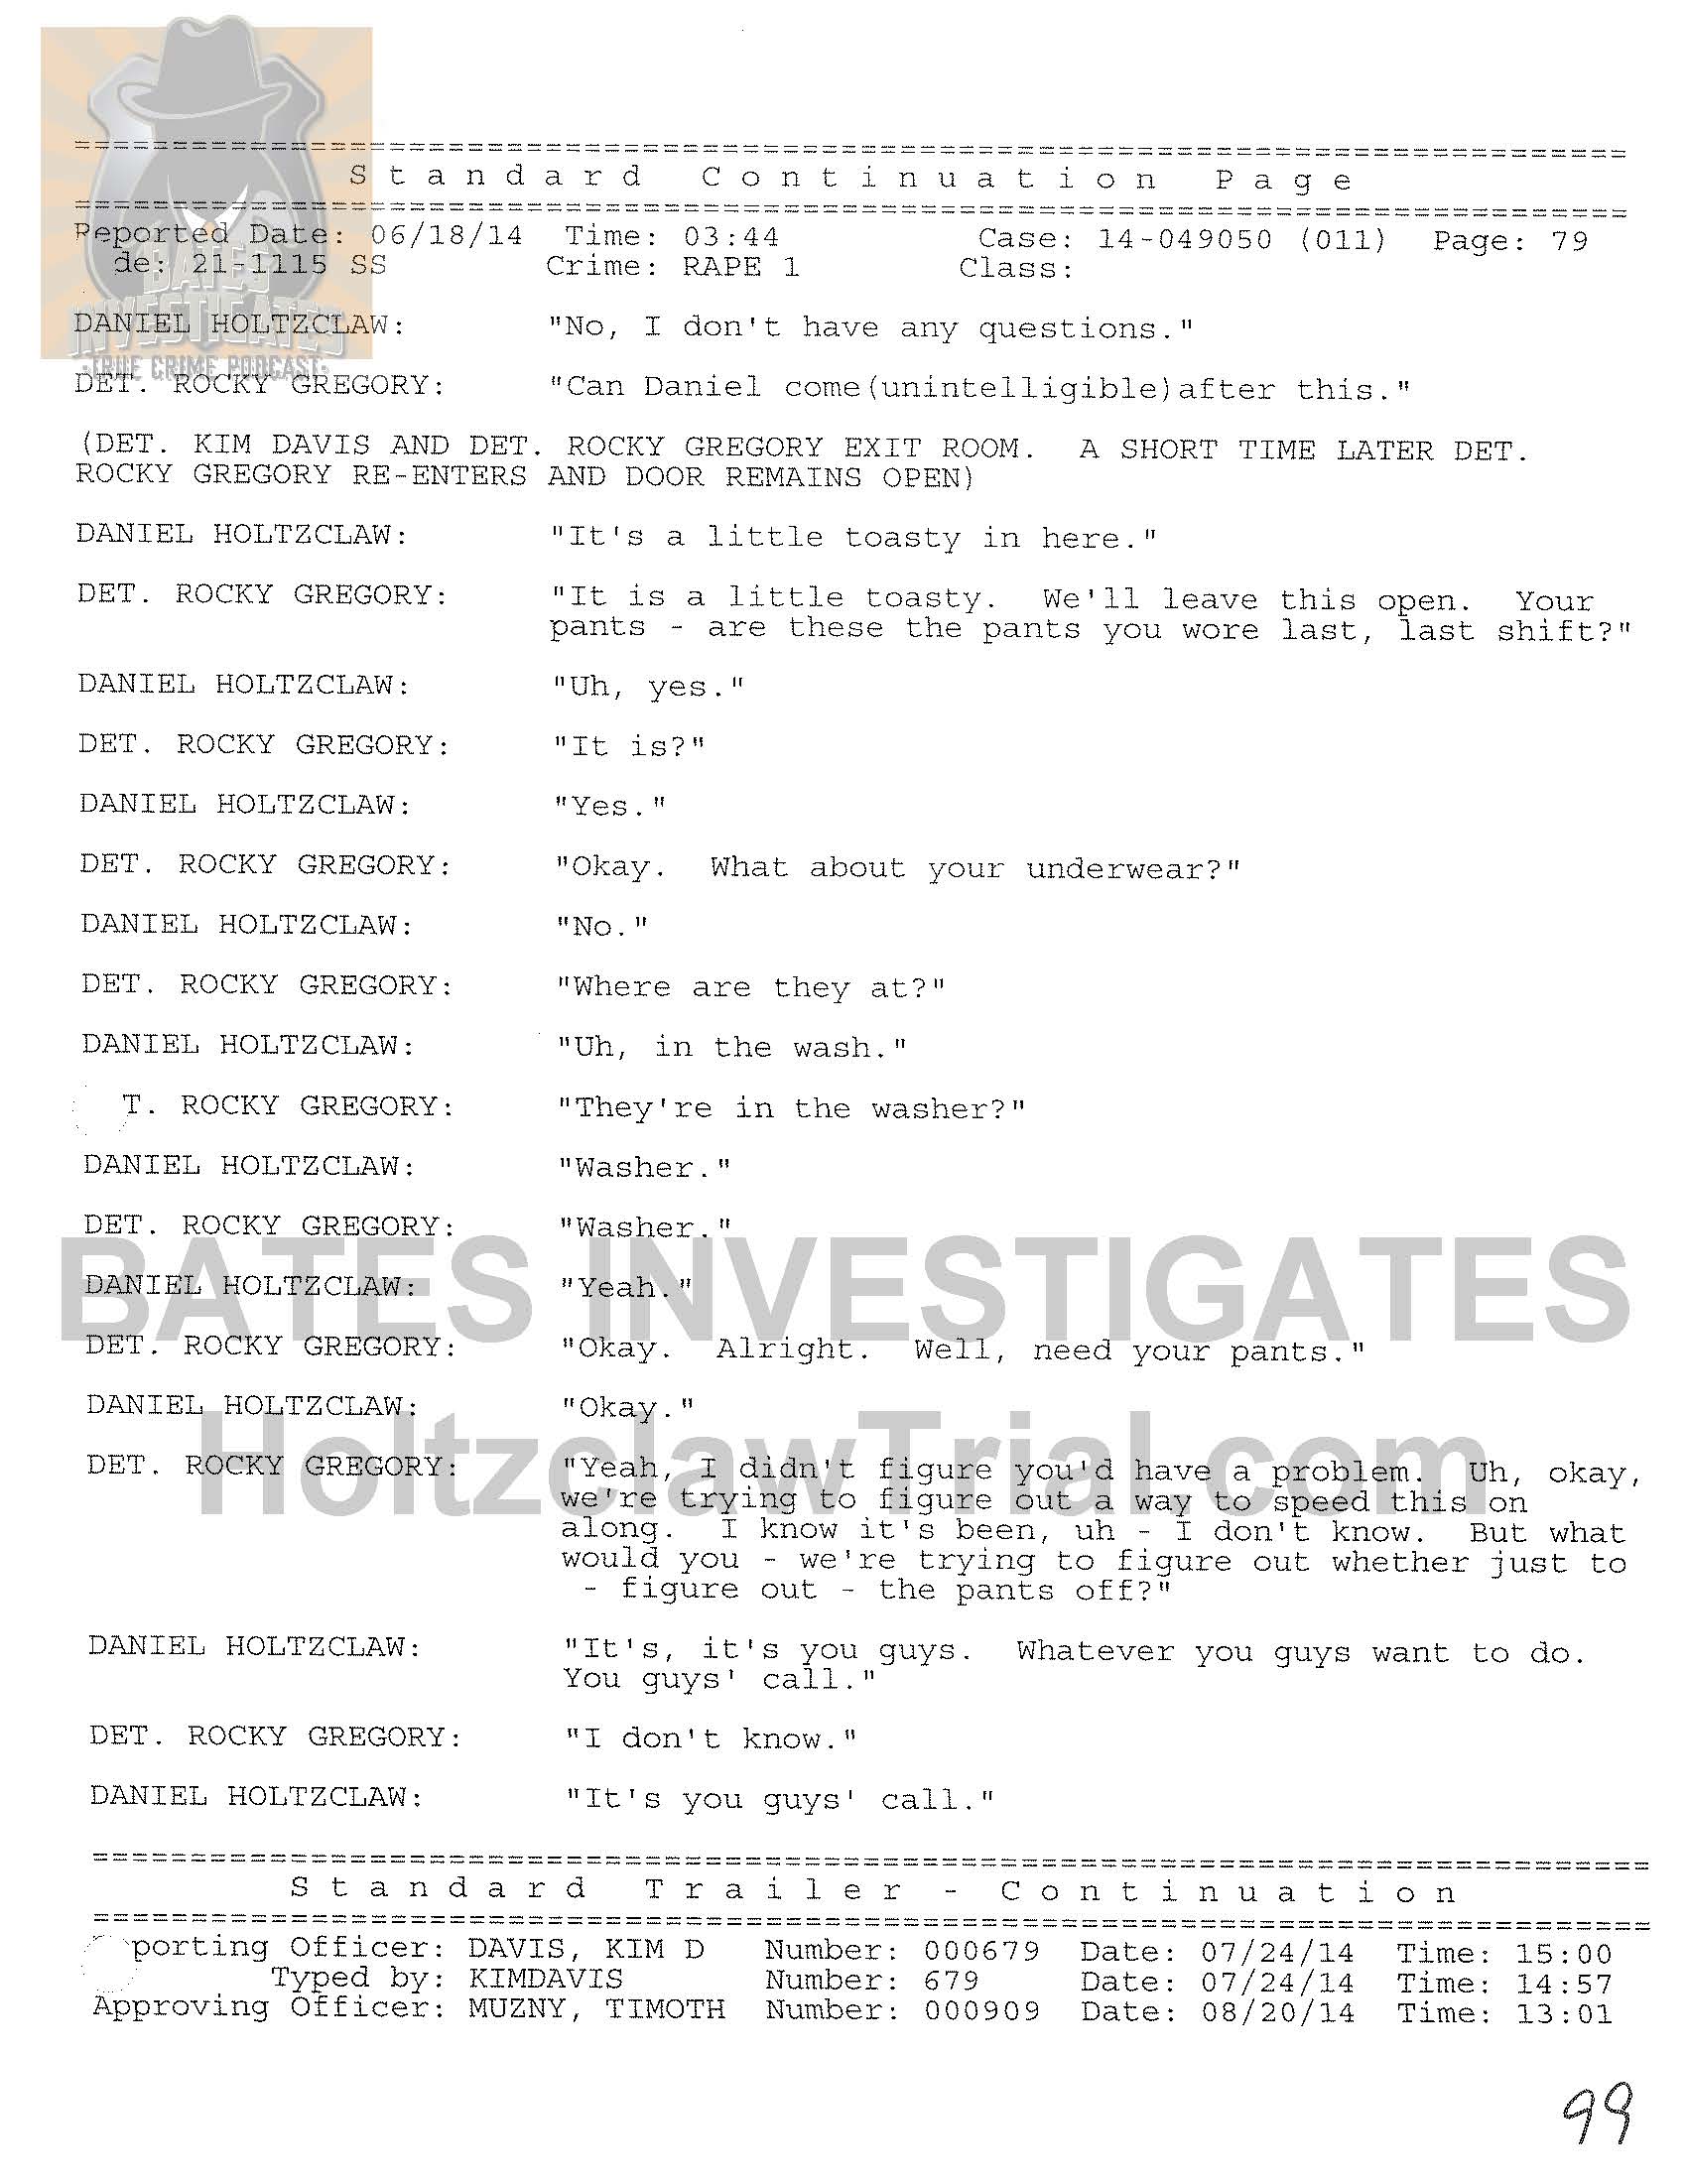 Holtzclaw Interrogation Transcript - Ep02 Redacted_Page_79.jpg